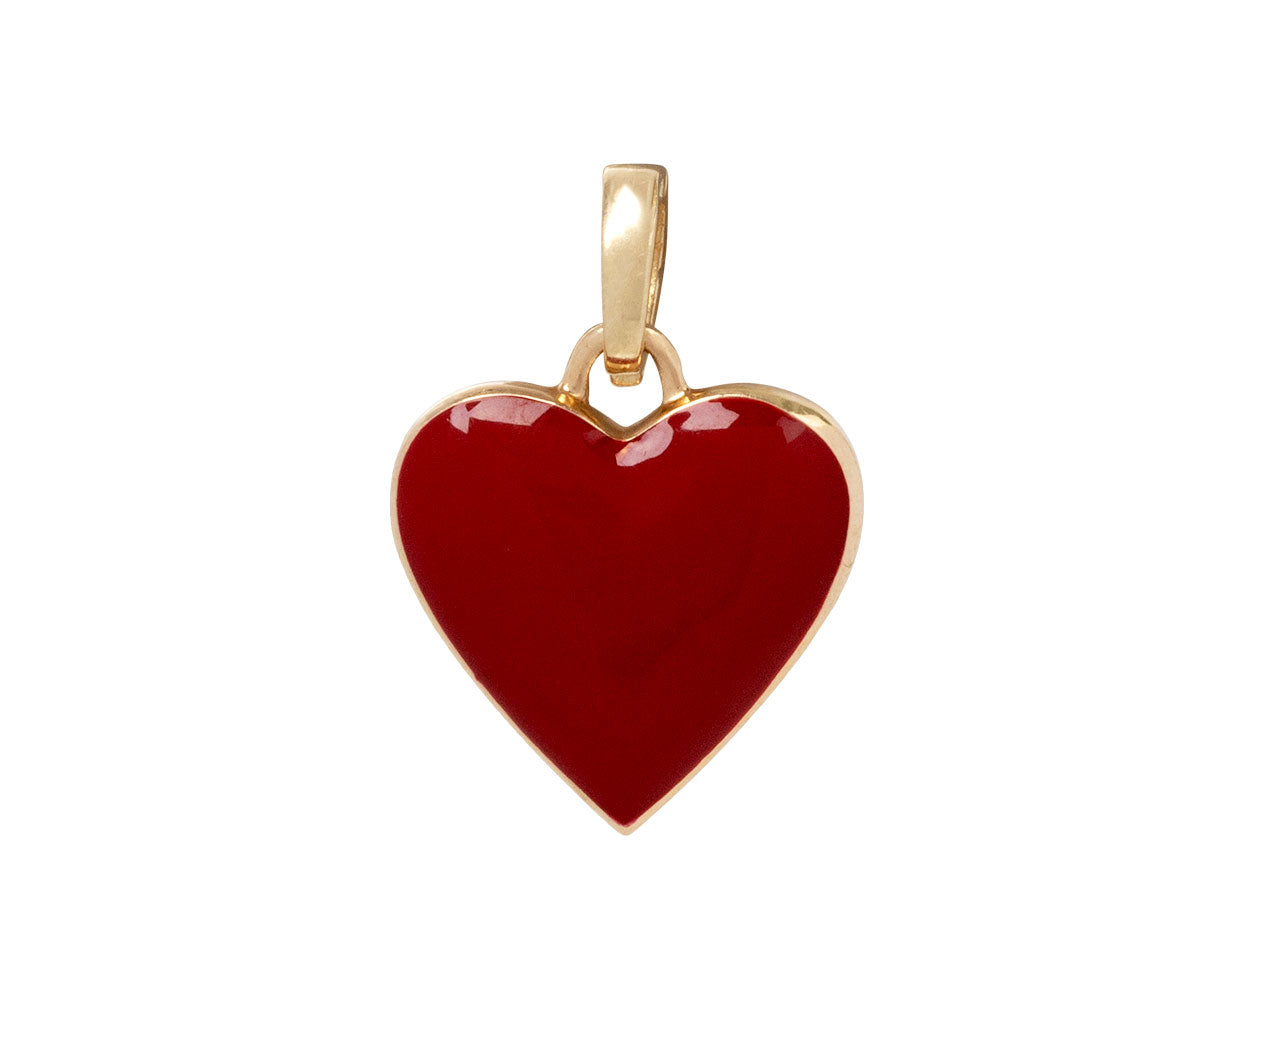 Have A Heart x Muse kWIT Red Enamel Amour du Soleil Heart Charm Only